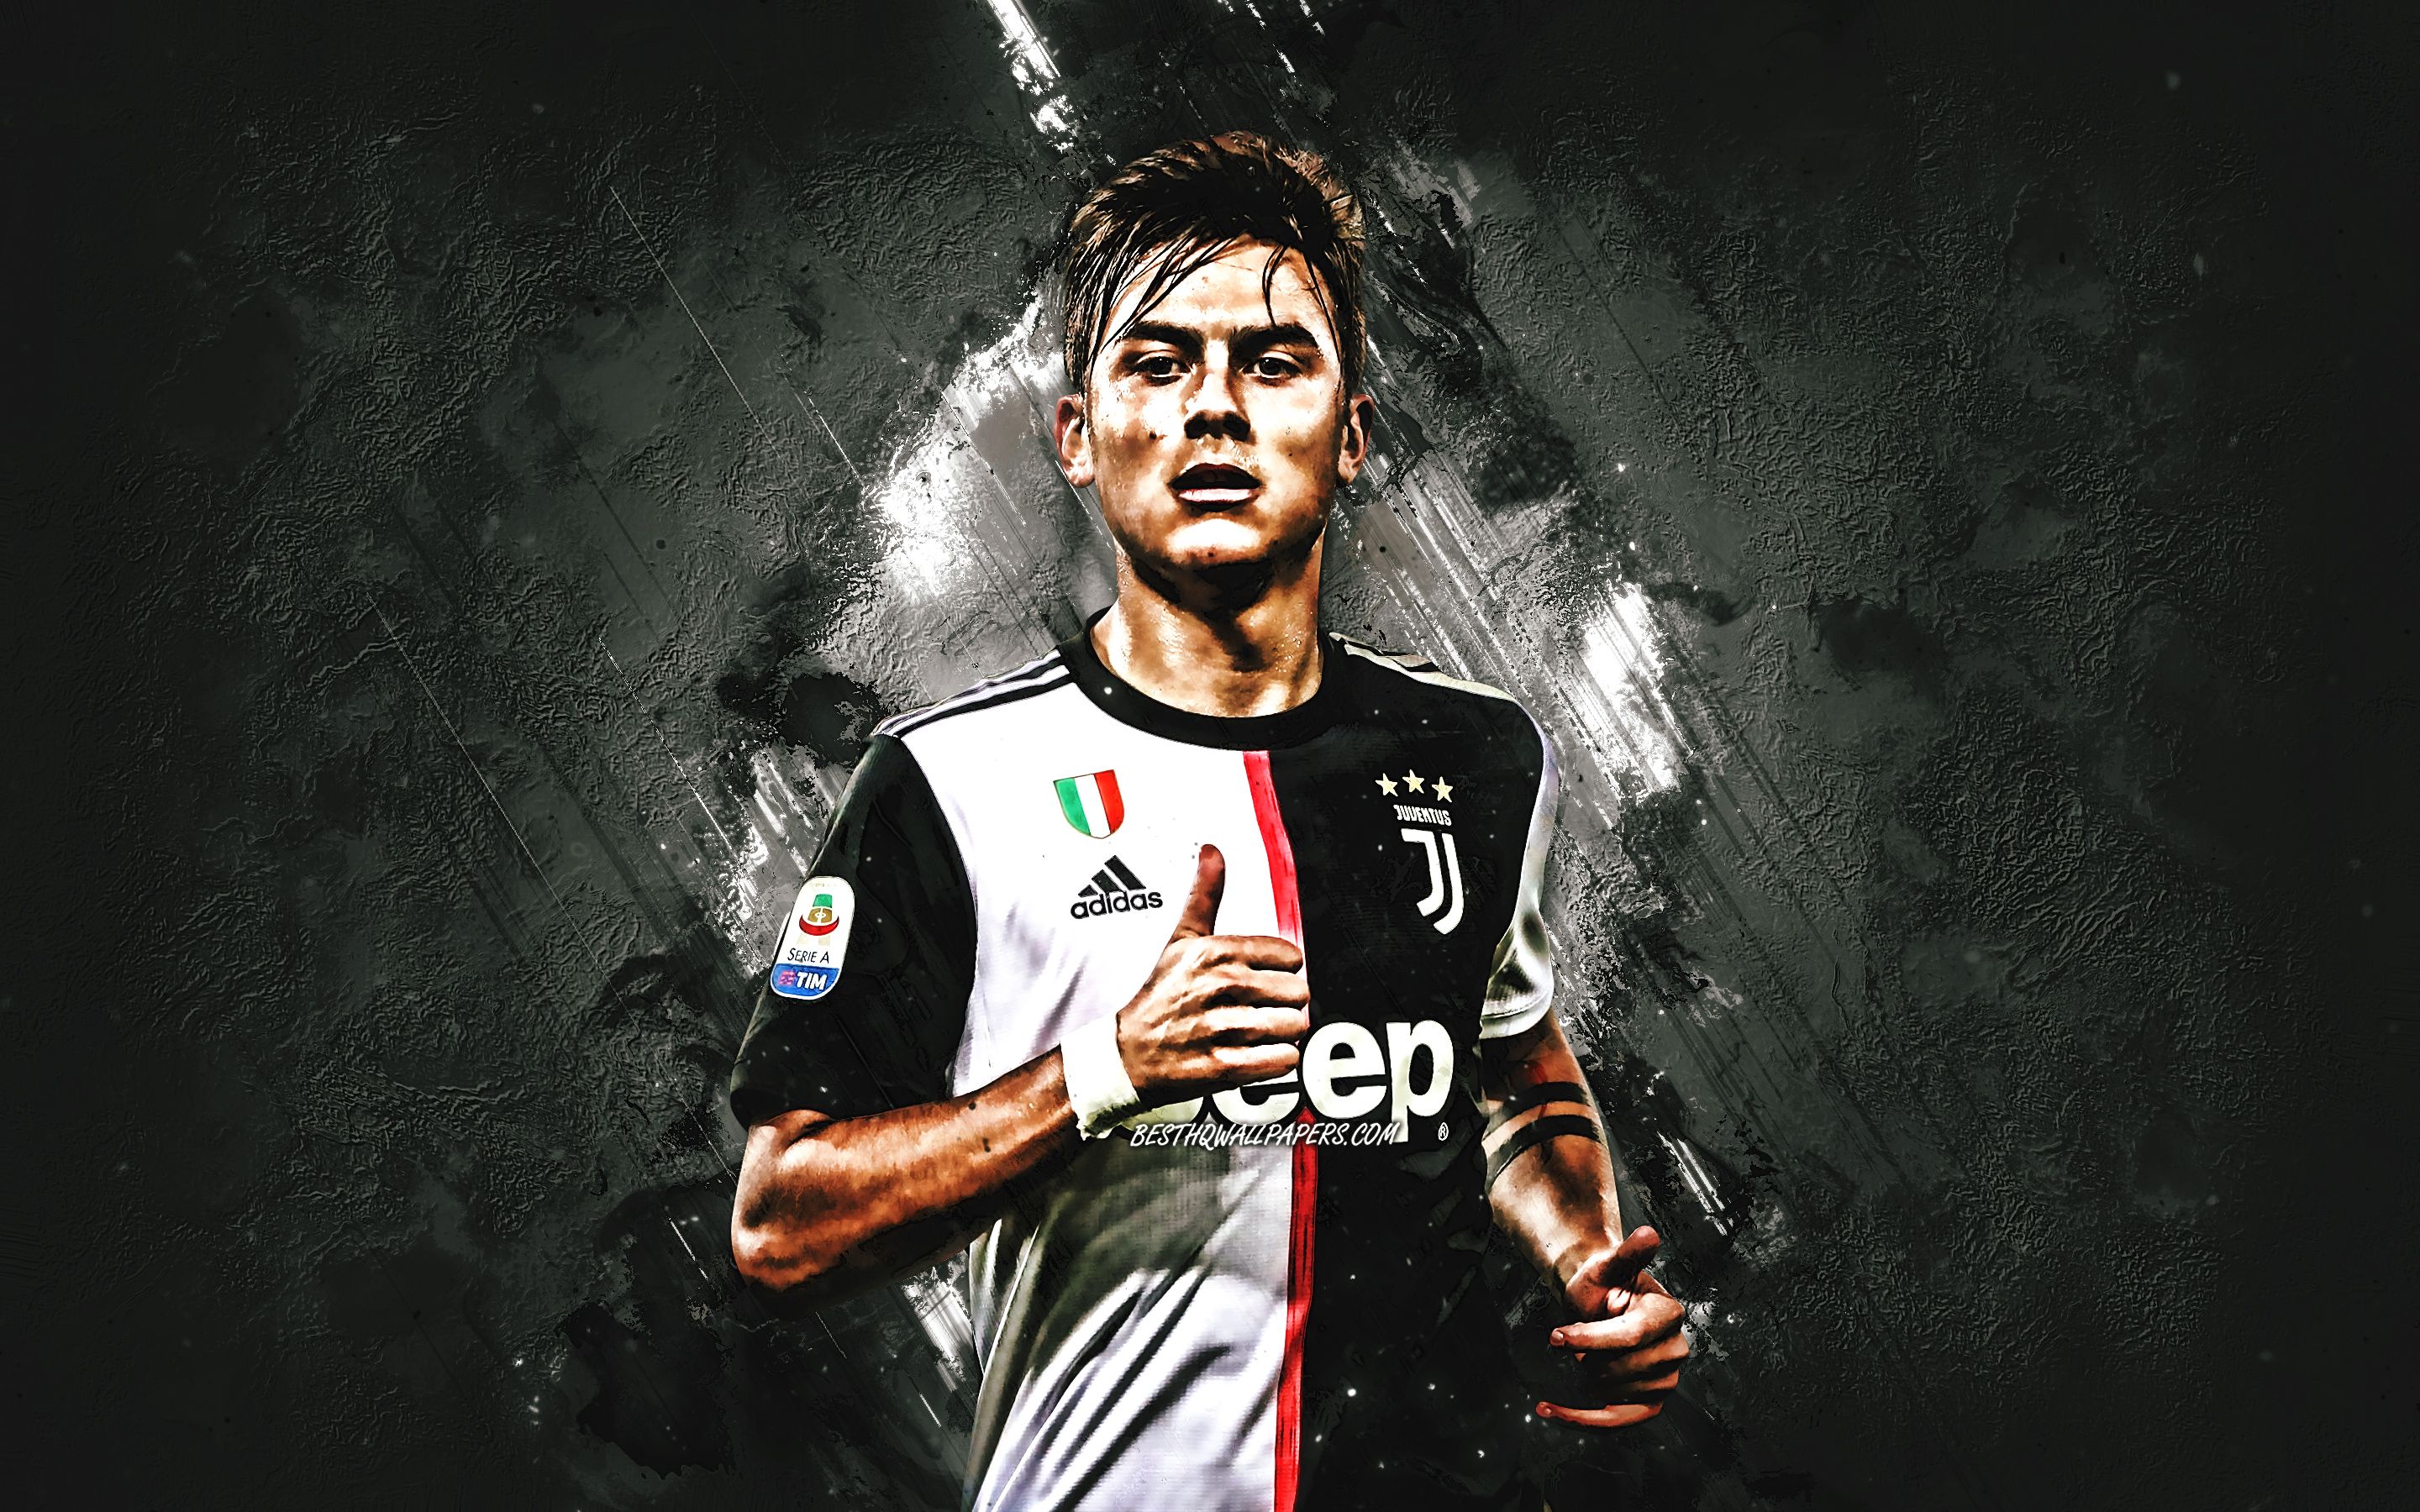 Download wallpaper Paulo Dybala, Juventus FC, Argentinian football player, striker, portrait, gray creative background, Serie A, Italy, Juventus 2020 football players, football for desktop with resolution 2880x1800. High Quality HD picture wallpaper